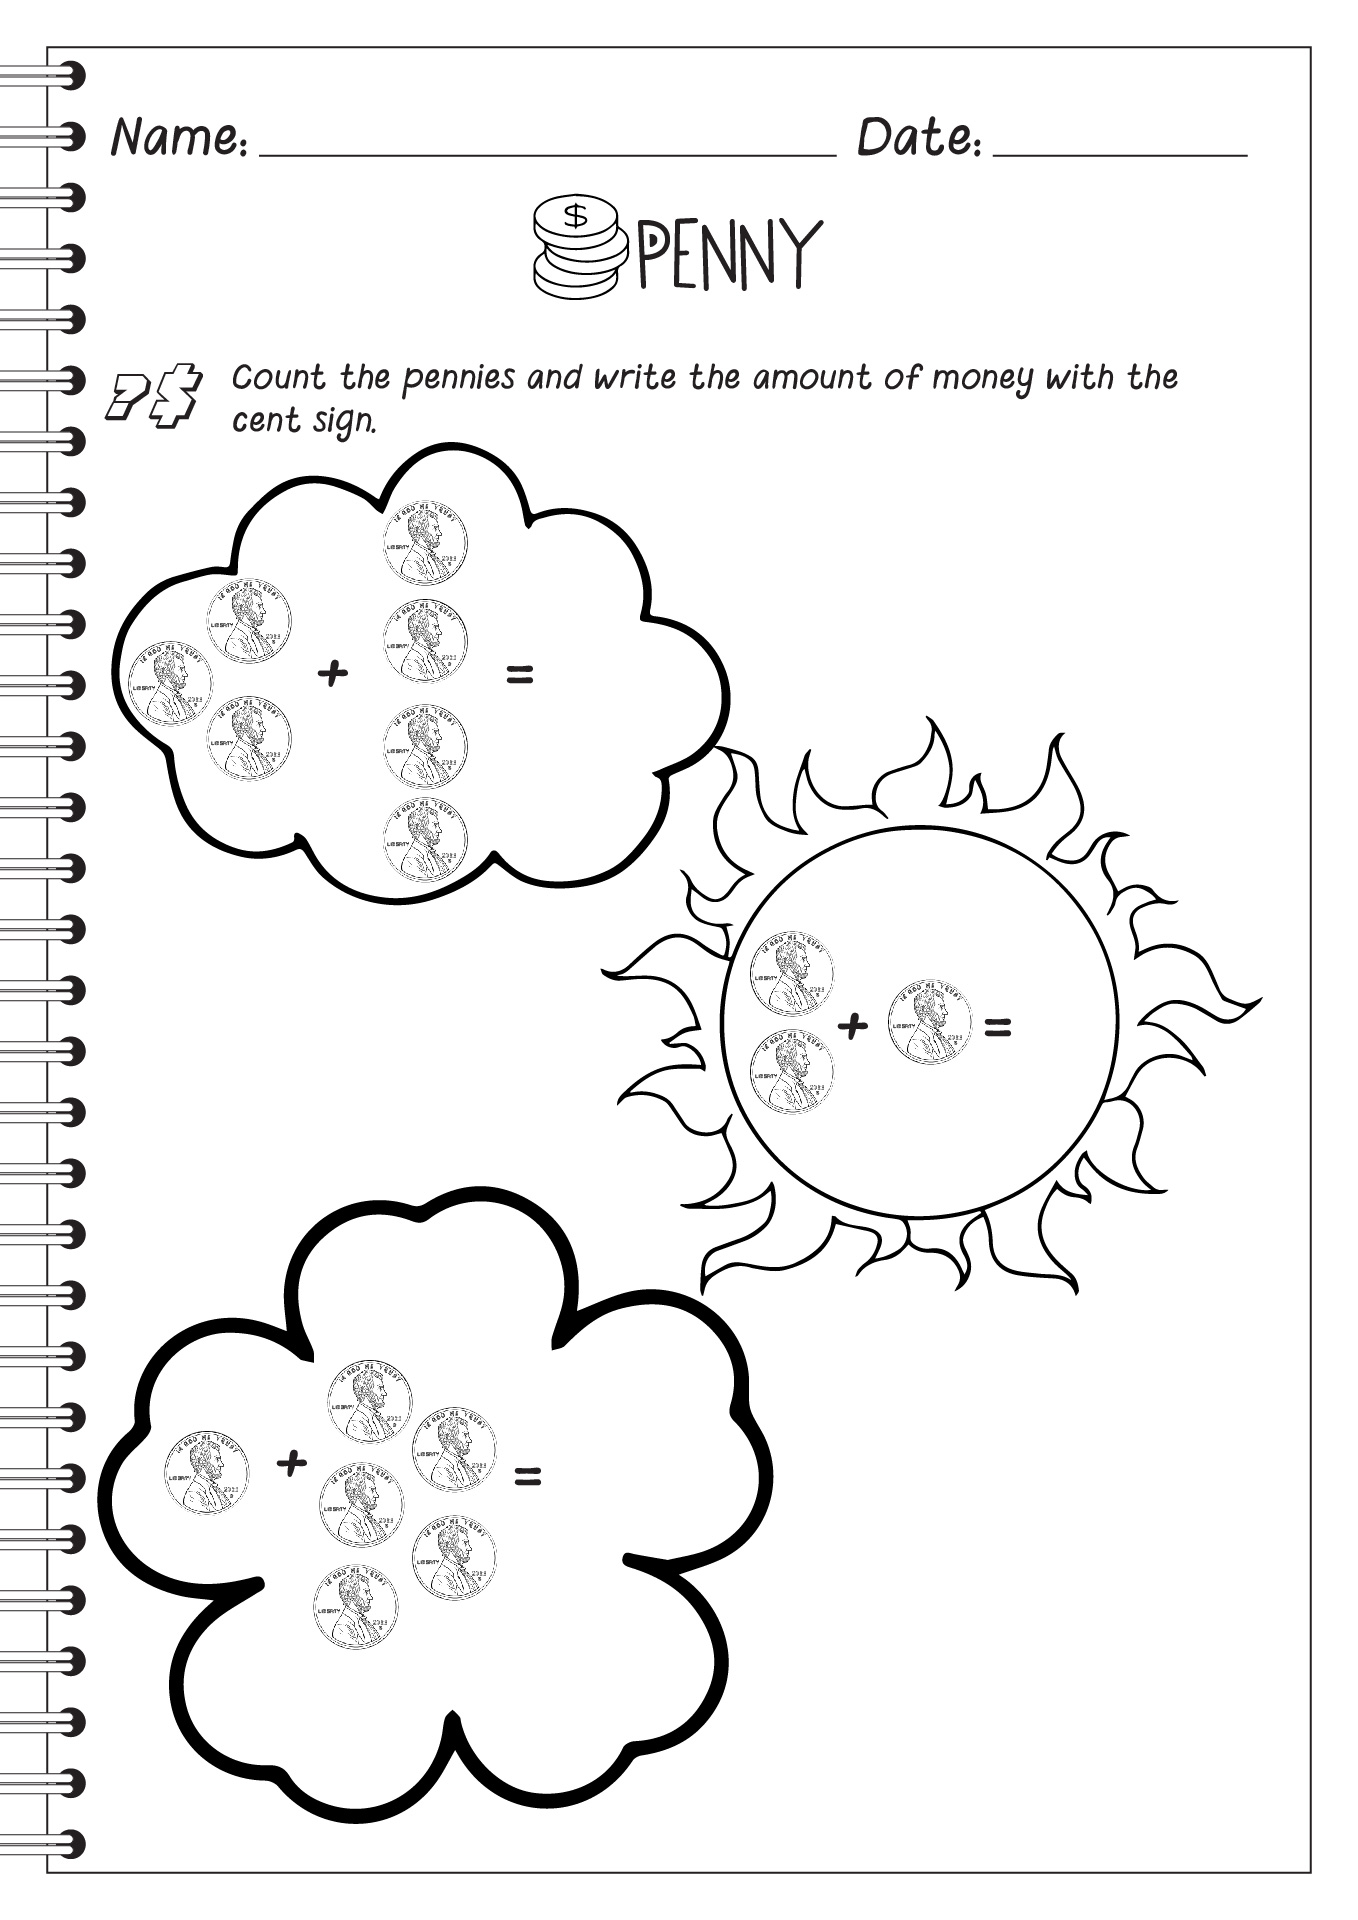 Penny Out of Print Worksheets